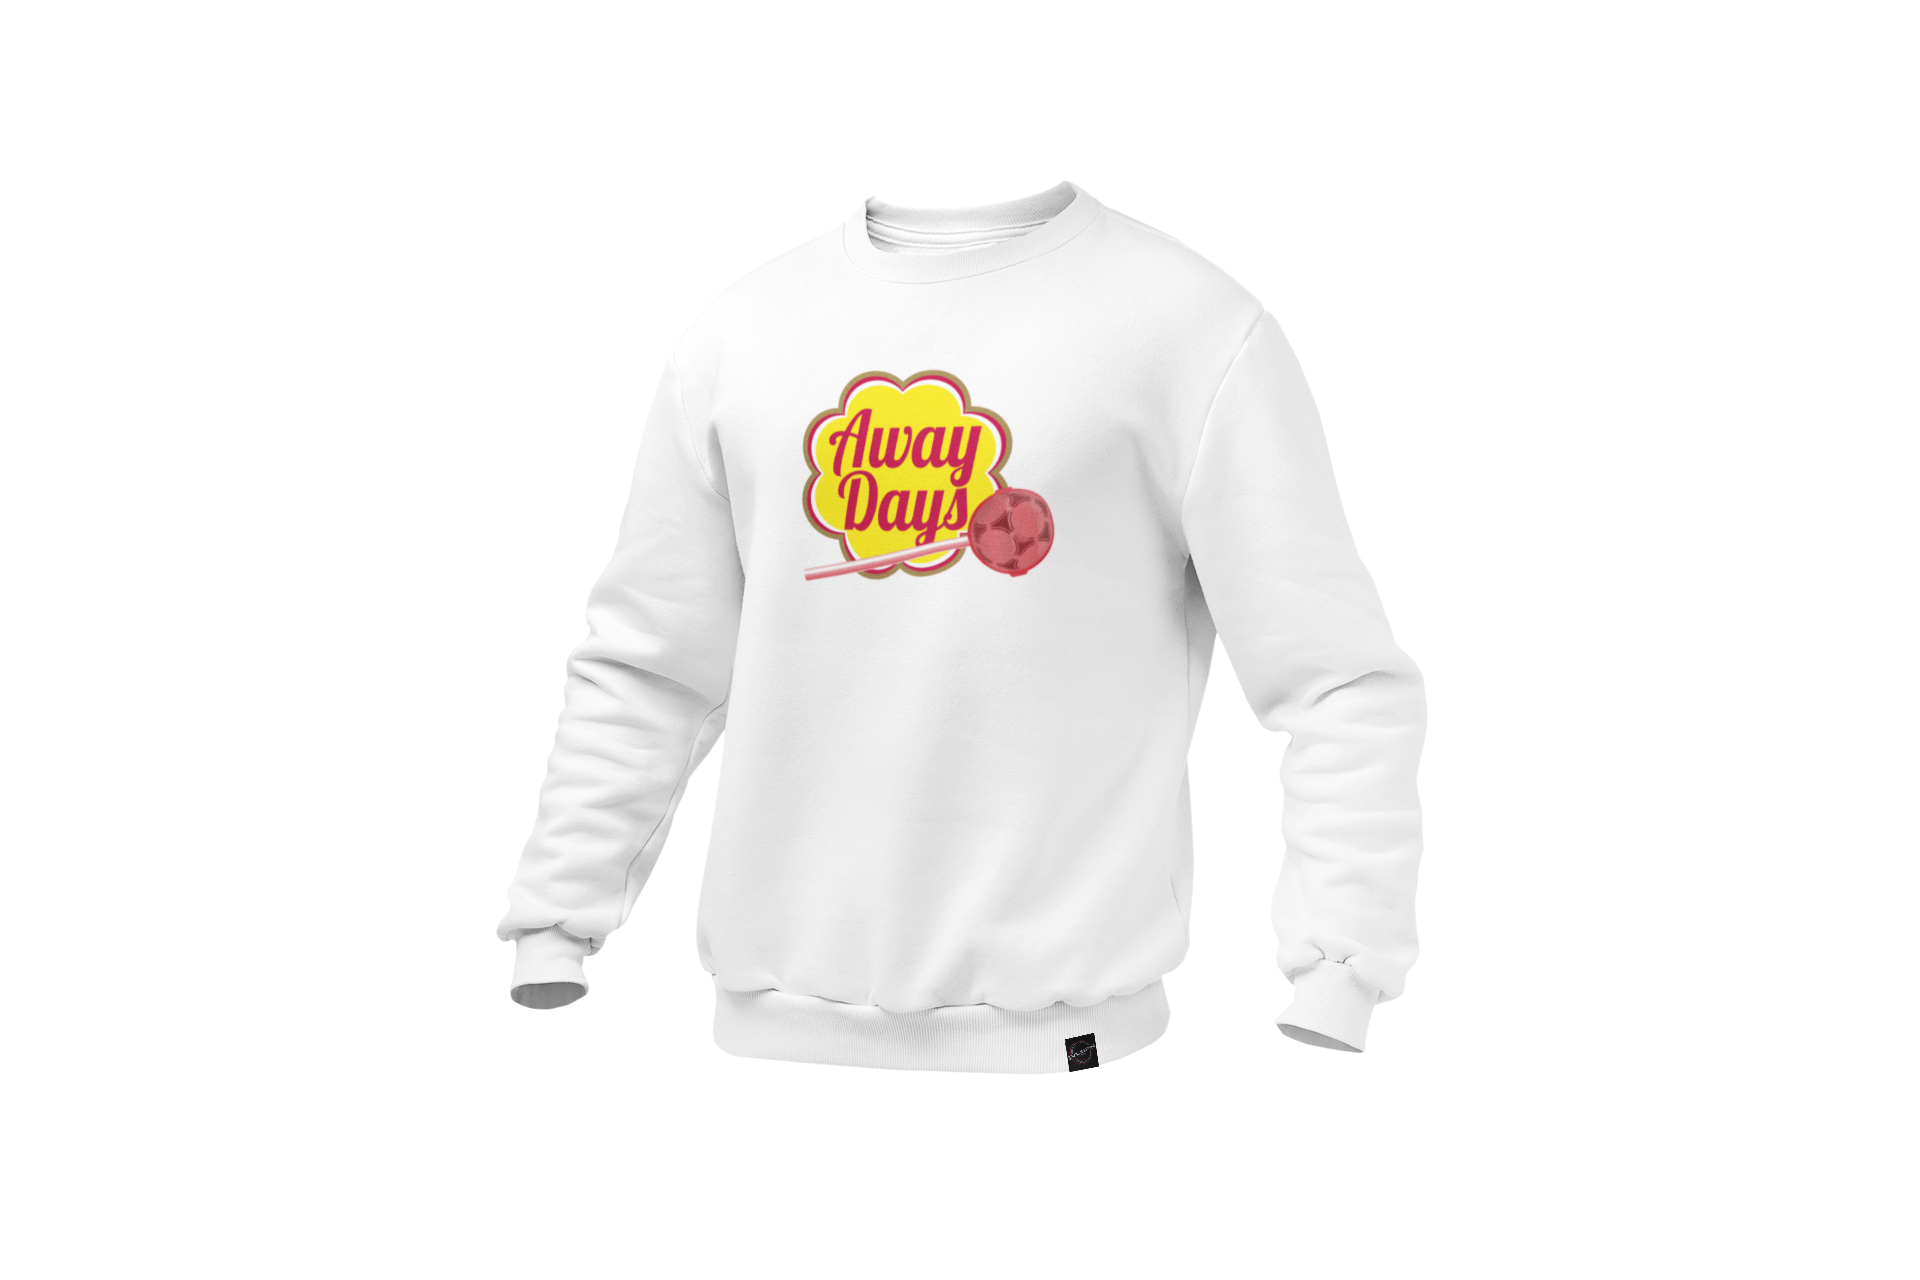 mockup-of-a-ghosted-crewneck-sweatshirt-over-a-solid-background-26960 - 2020-11-06T163753.044.png